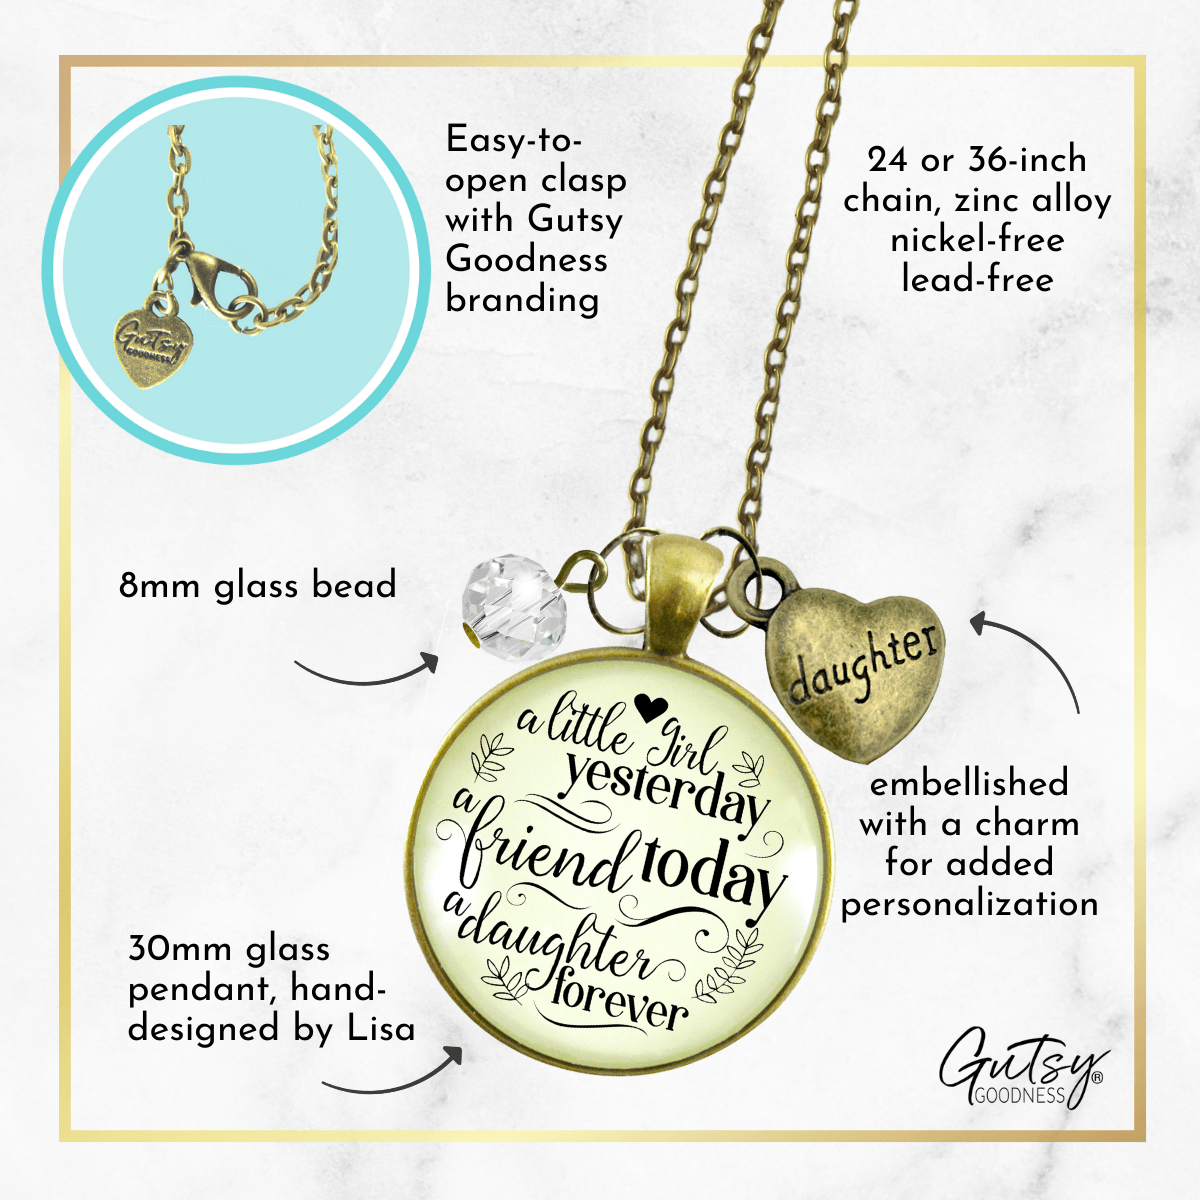 Gutsy Goodness To Our Daughter Necklace Little Yesterday Gift from Parent Mom Dad - Gutsy Goodness Handmade Jewelry;To Our Daughter Necklace Little Yesterday Gift From Parent Mom Dad - Gutsy Goodness Handmade Jewelry Gifts